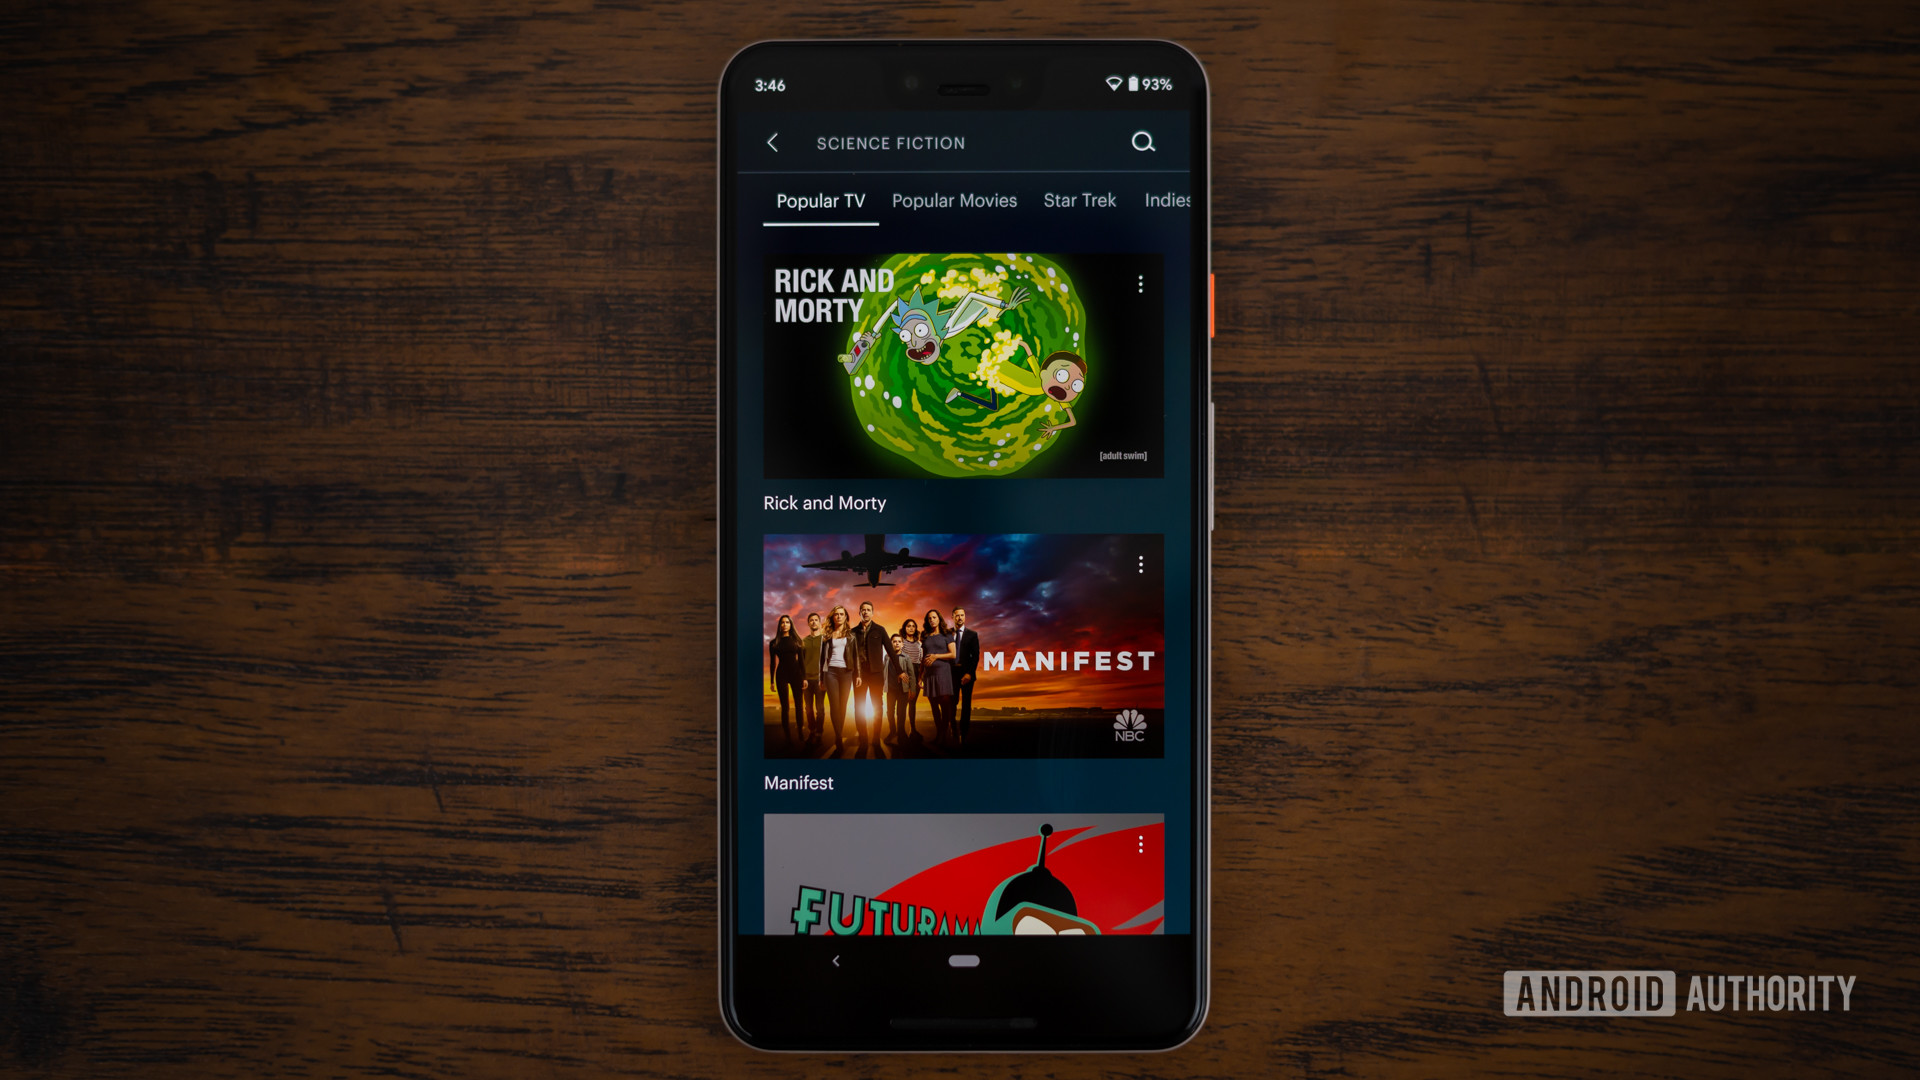 Hulu Science Fiction section shown on smartphone - how many people can watch Hulu at once